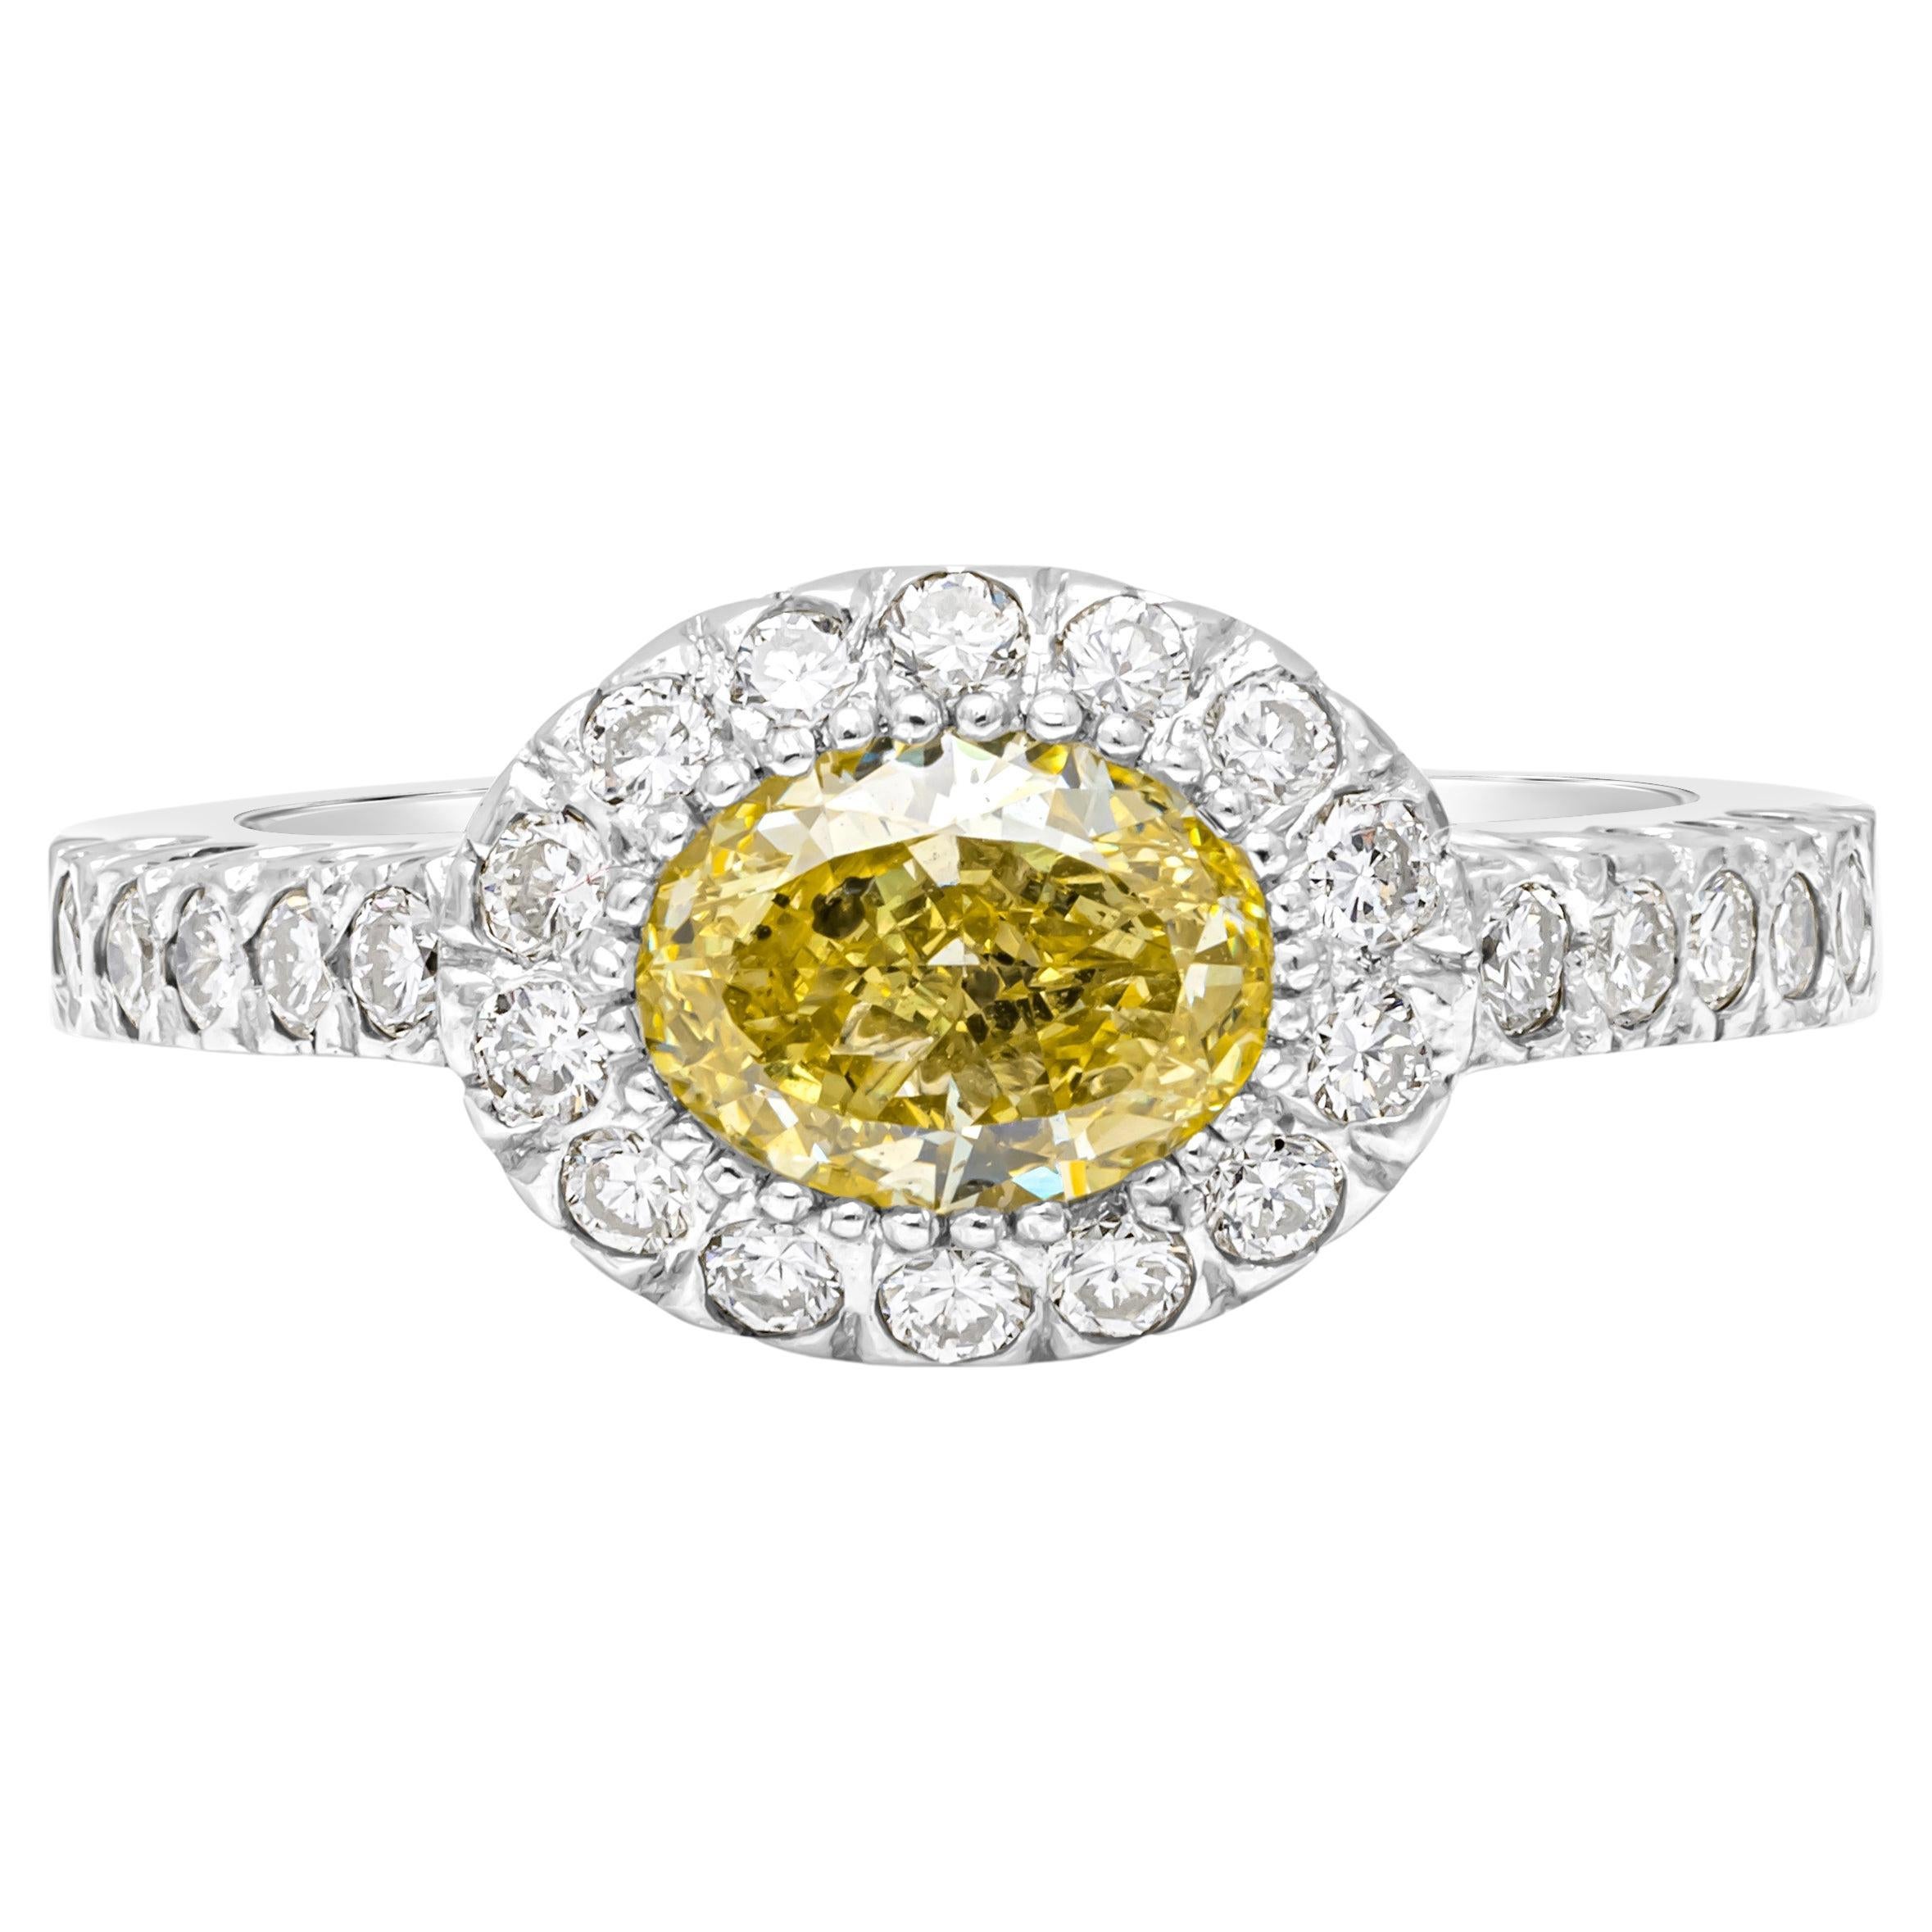 GIA Certified 1.03 Carats Oval Cut Fancy Yellow Diamond Halo Engagement Ring